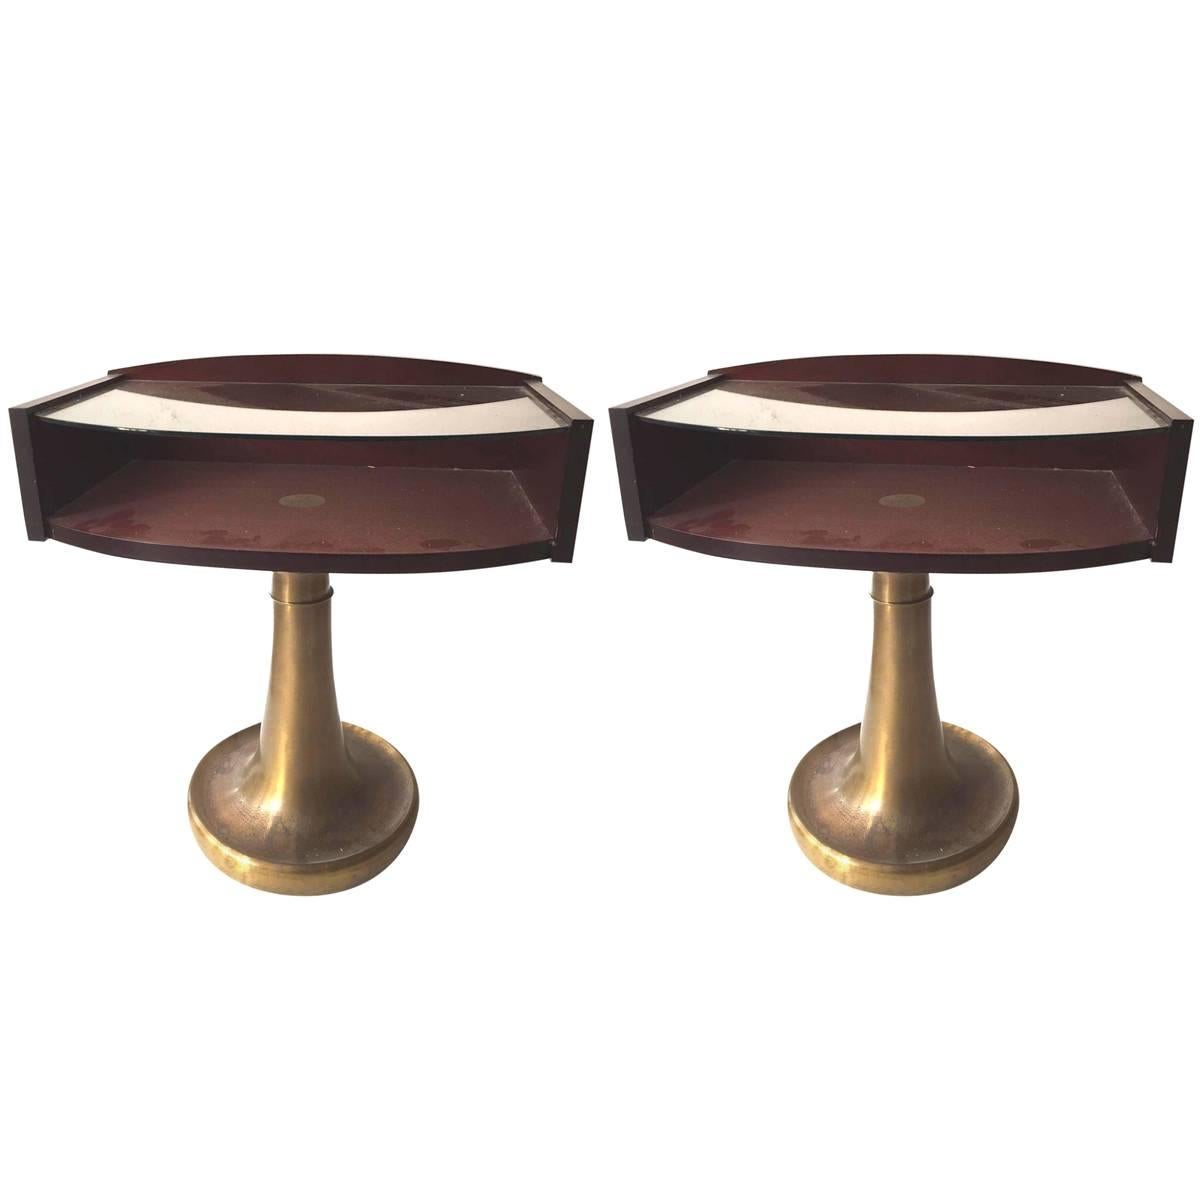 Vintage 1970s Pair of Side Tables Labelled "Ronchetti & Porro" For Sale